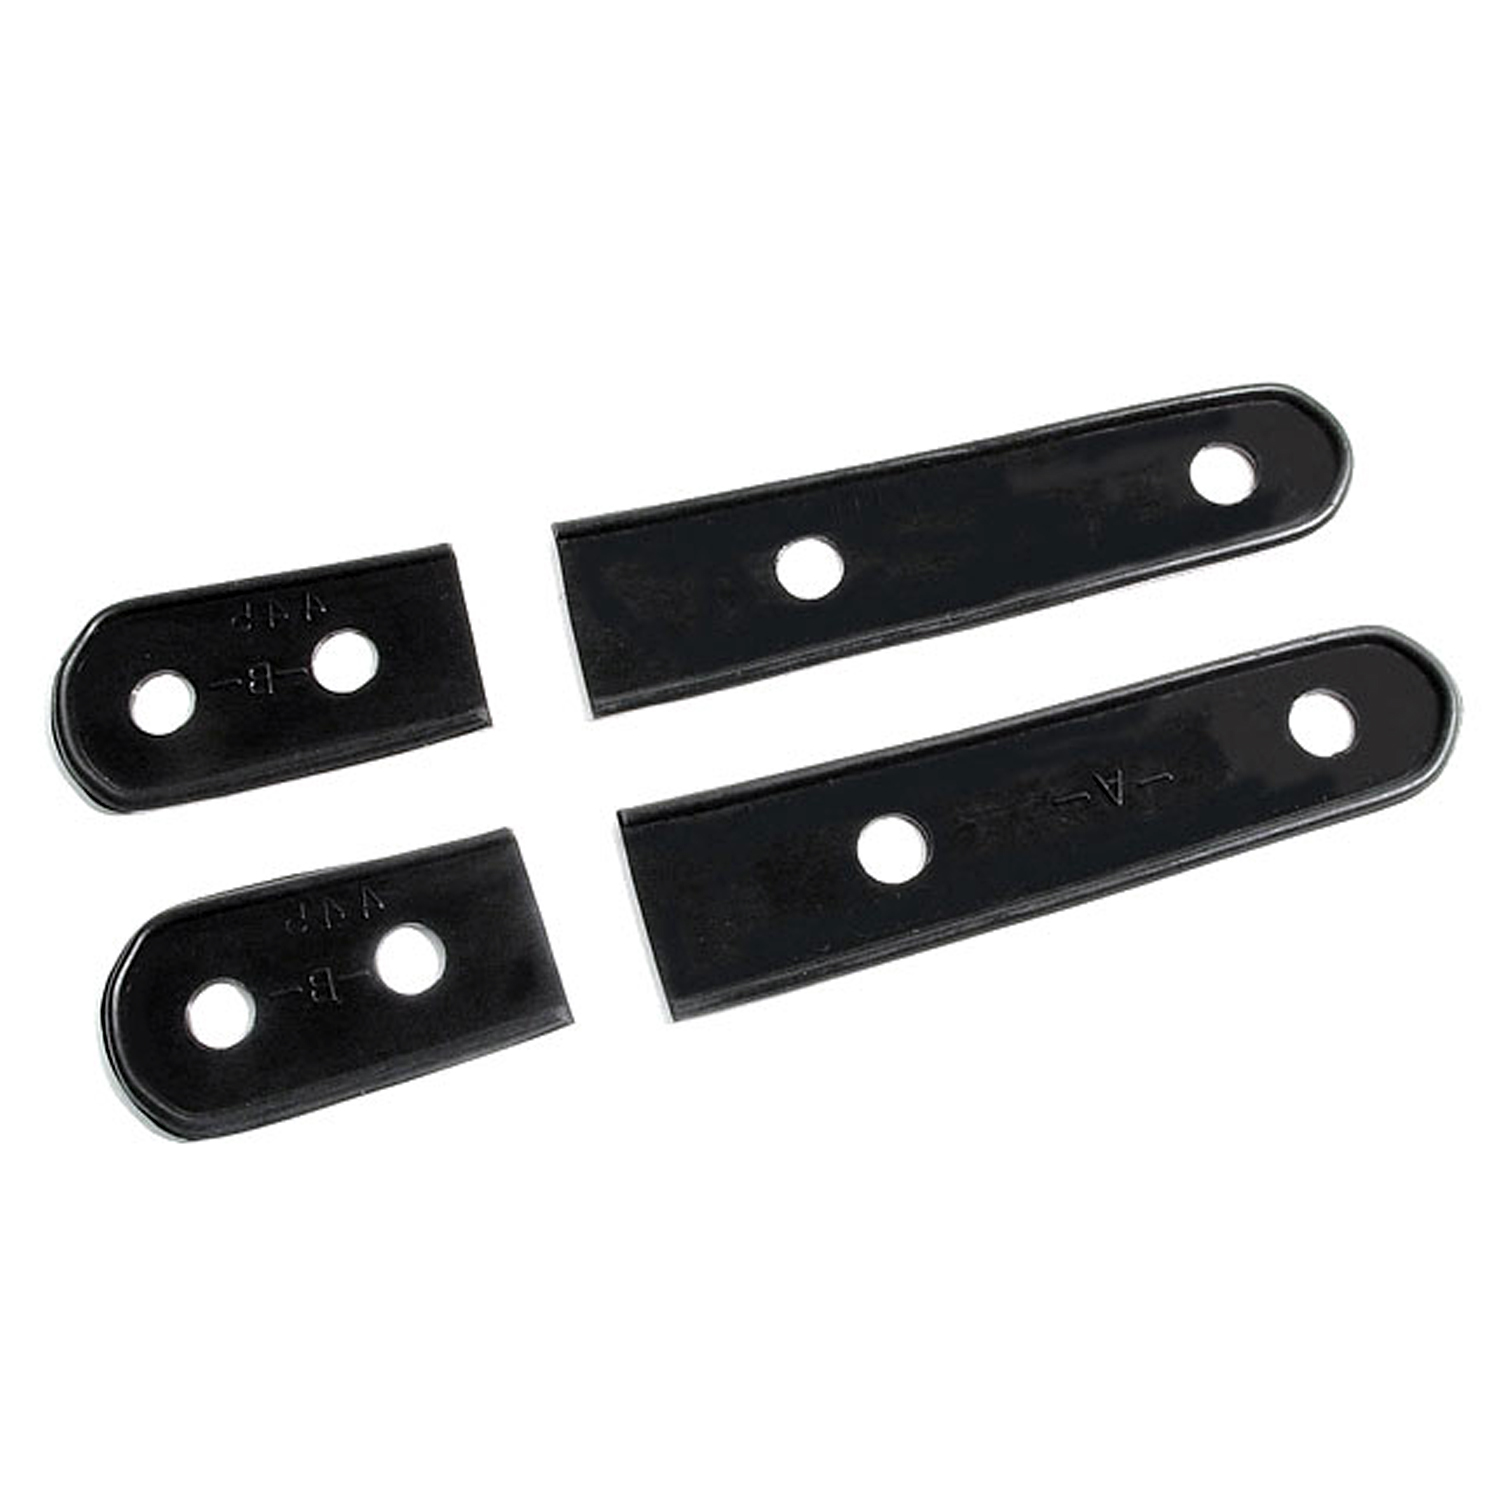 1940 Cadillac Series 90 Trunk Hinge Pads.  1-3/8 wide X 8 long.  4-Piece Set-MP 445